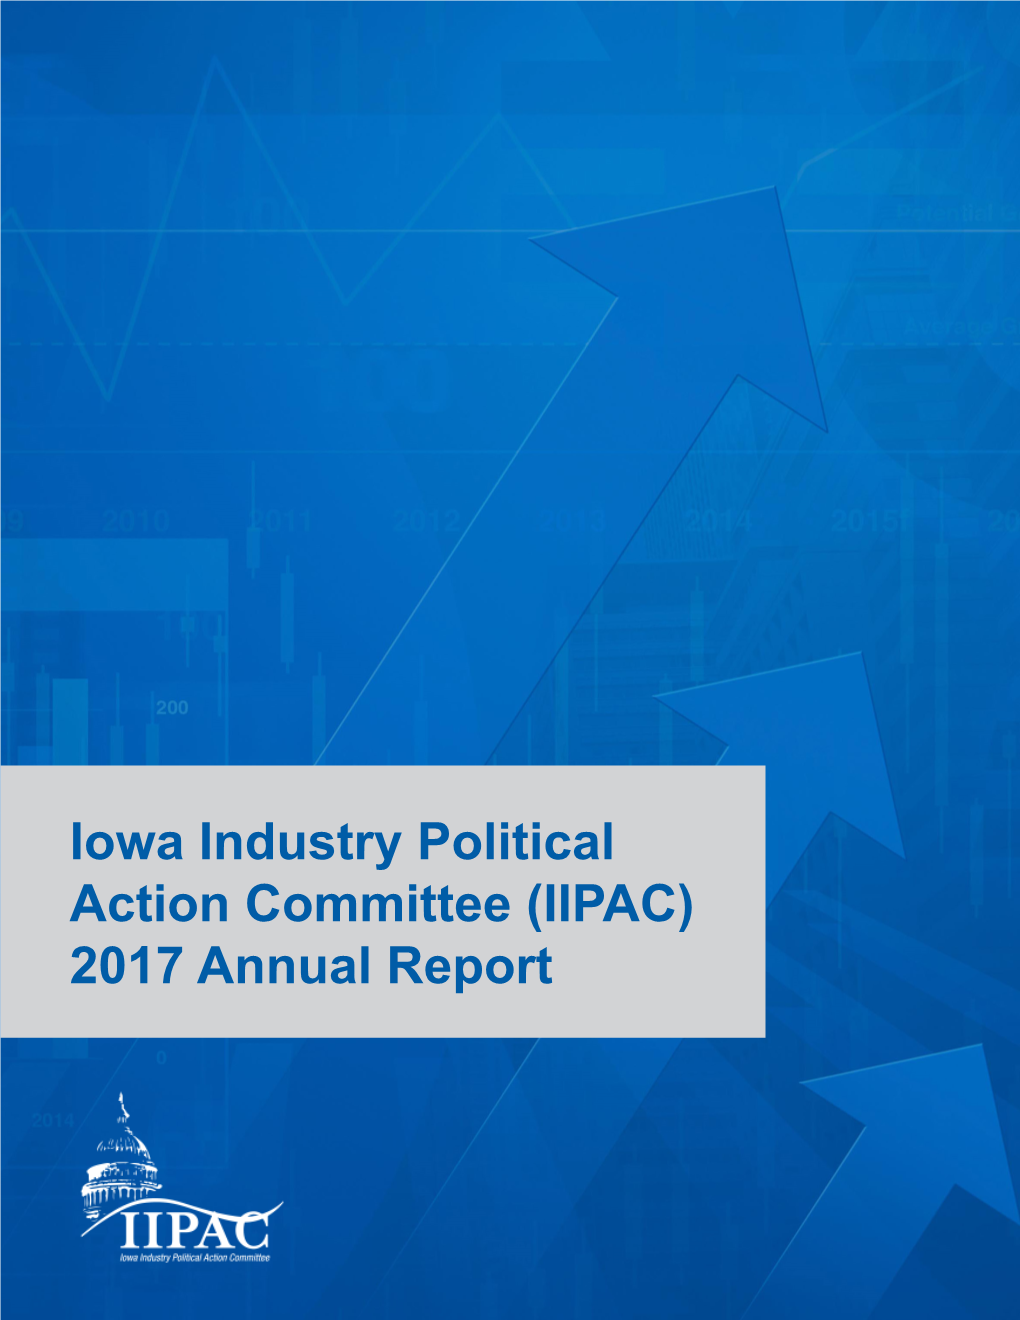 Iowa Industry Political Action Committee (IIPAC) 2017 Annual Report Message from IIPAC Chair